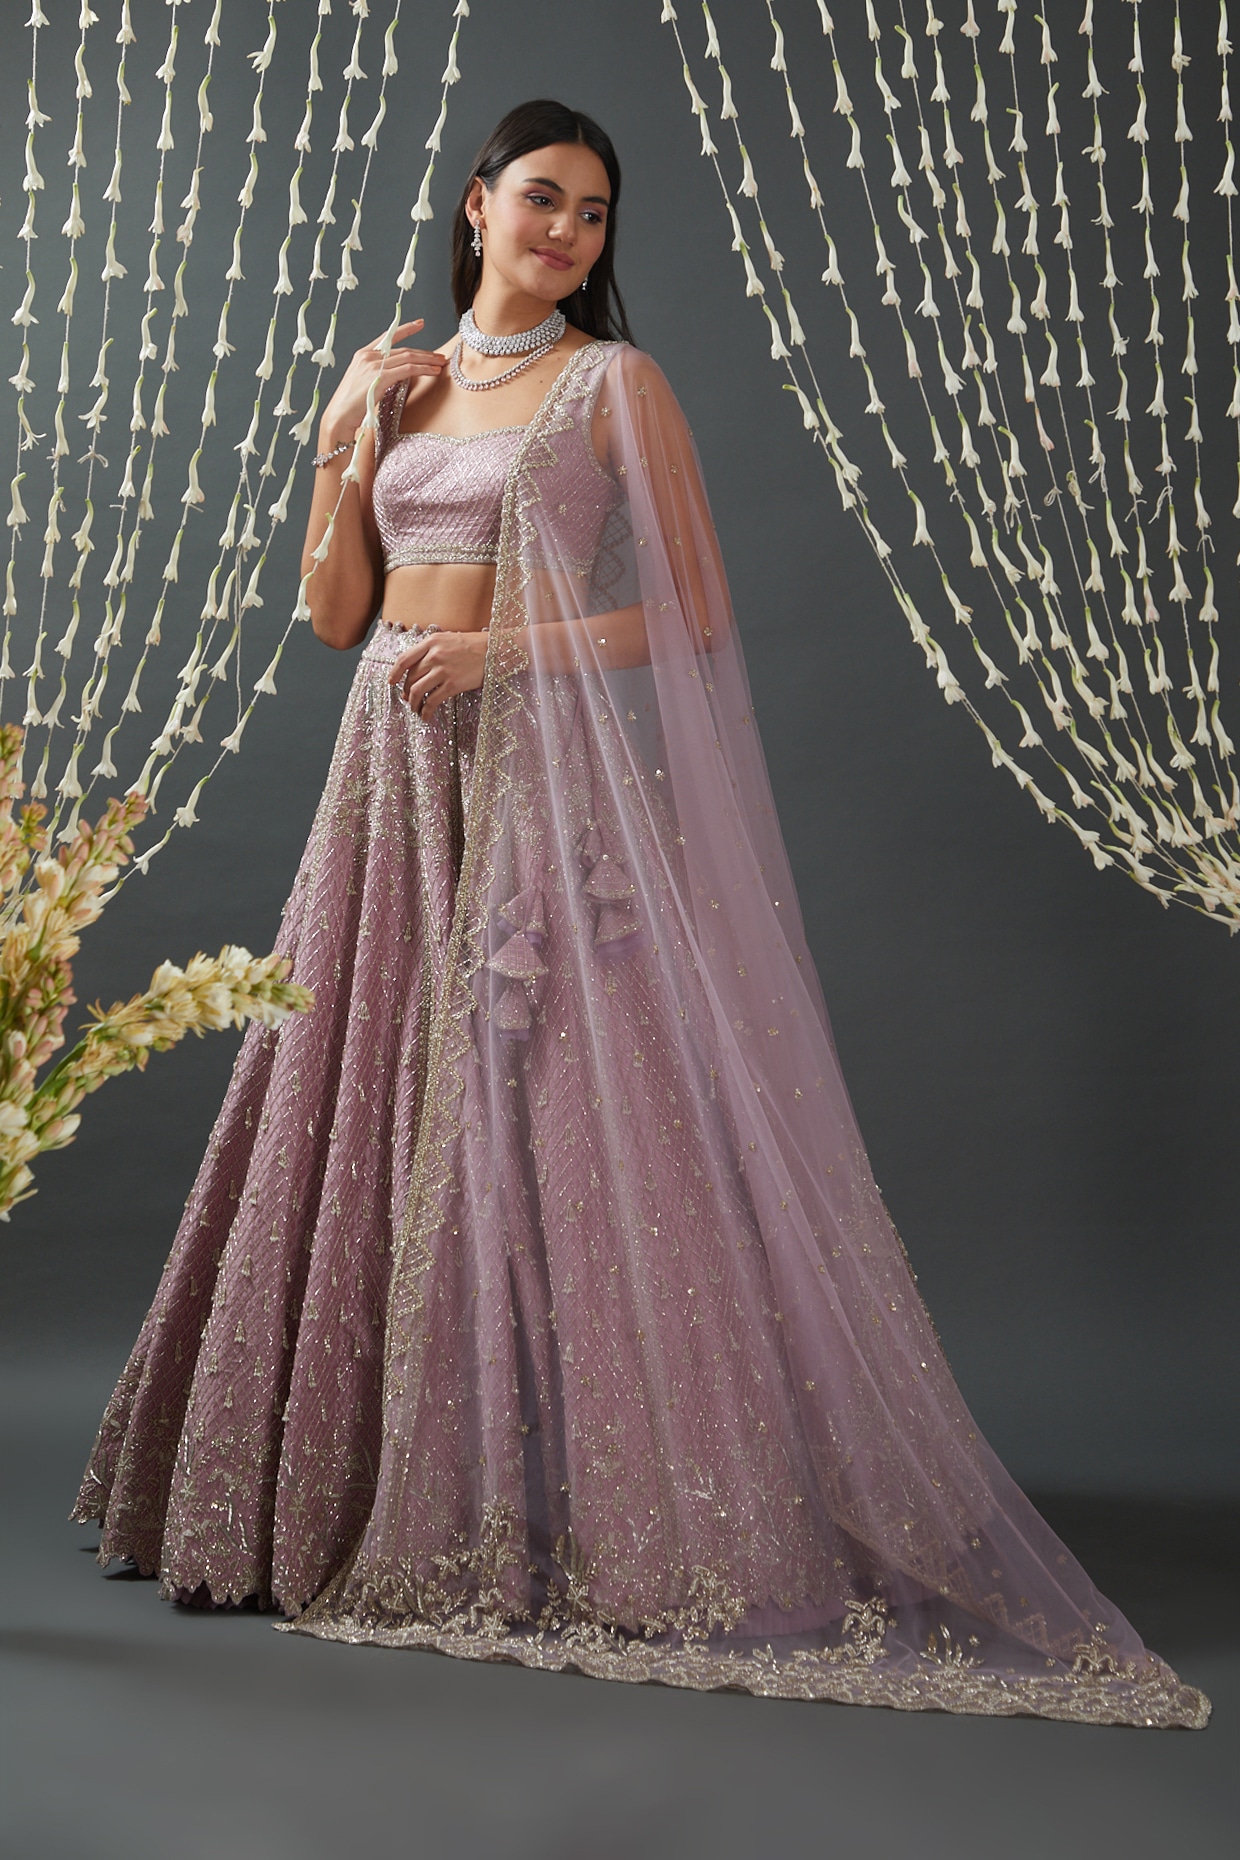 Anushree Reddy Bright Red Embroidered #Lehenga With Pink Embroidered  #Blouse & Dupatta. | Indian wedding dress, Indian bridal, Indian bridal  lehenga